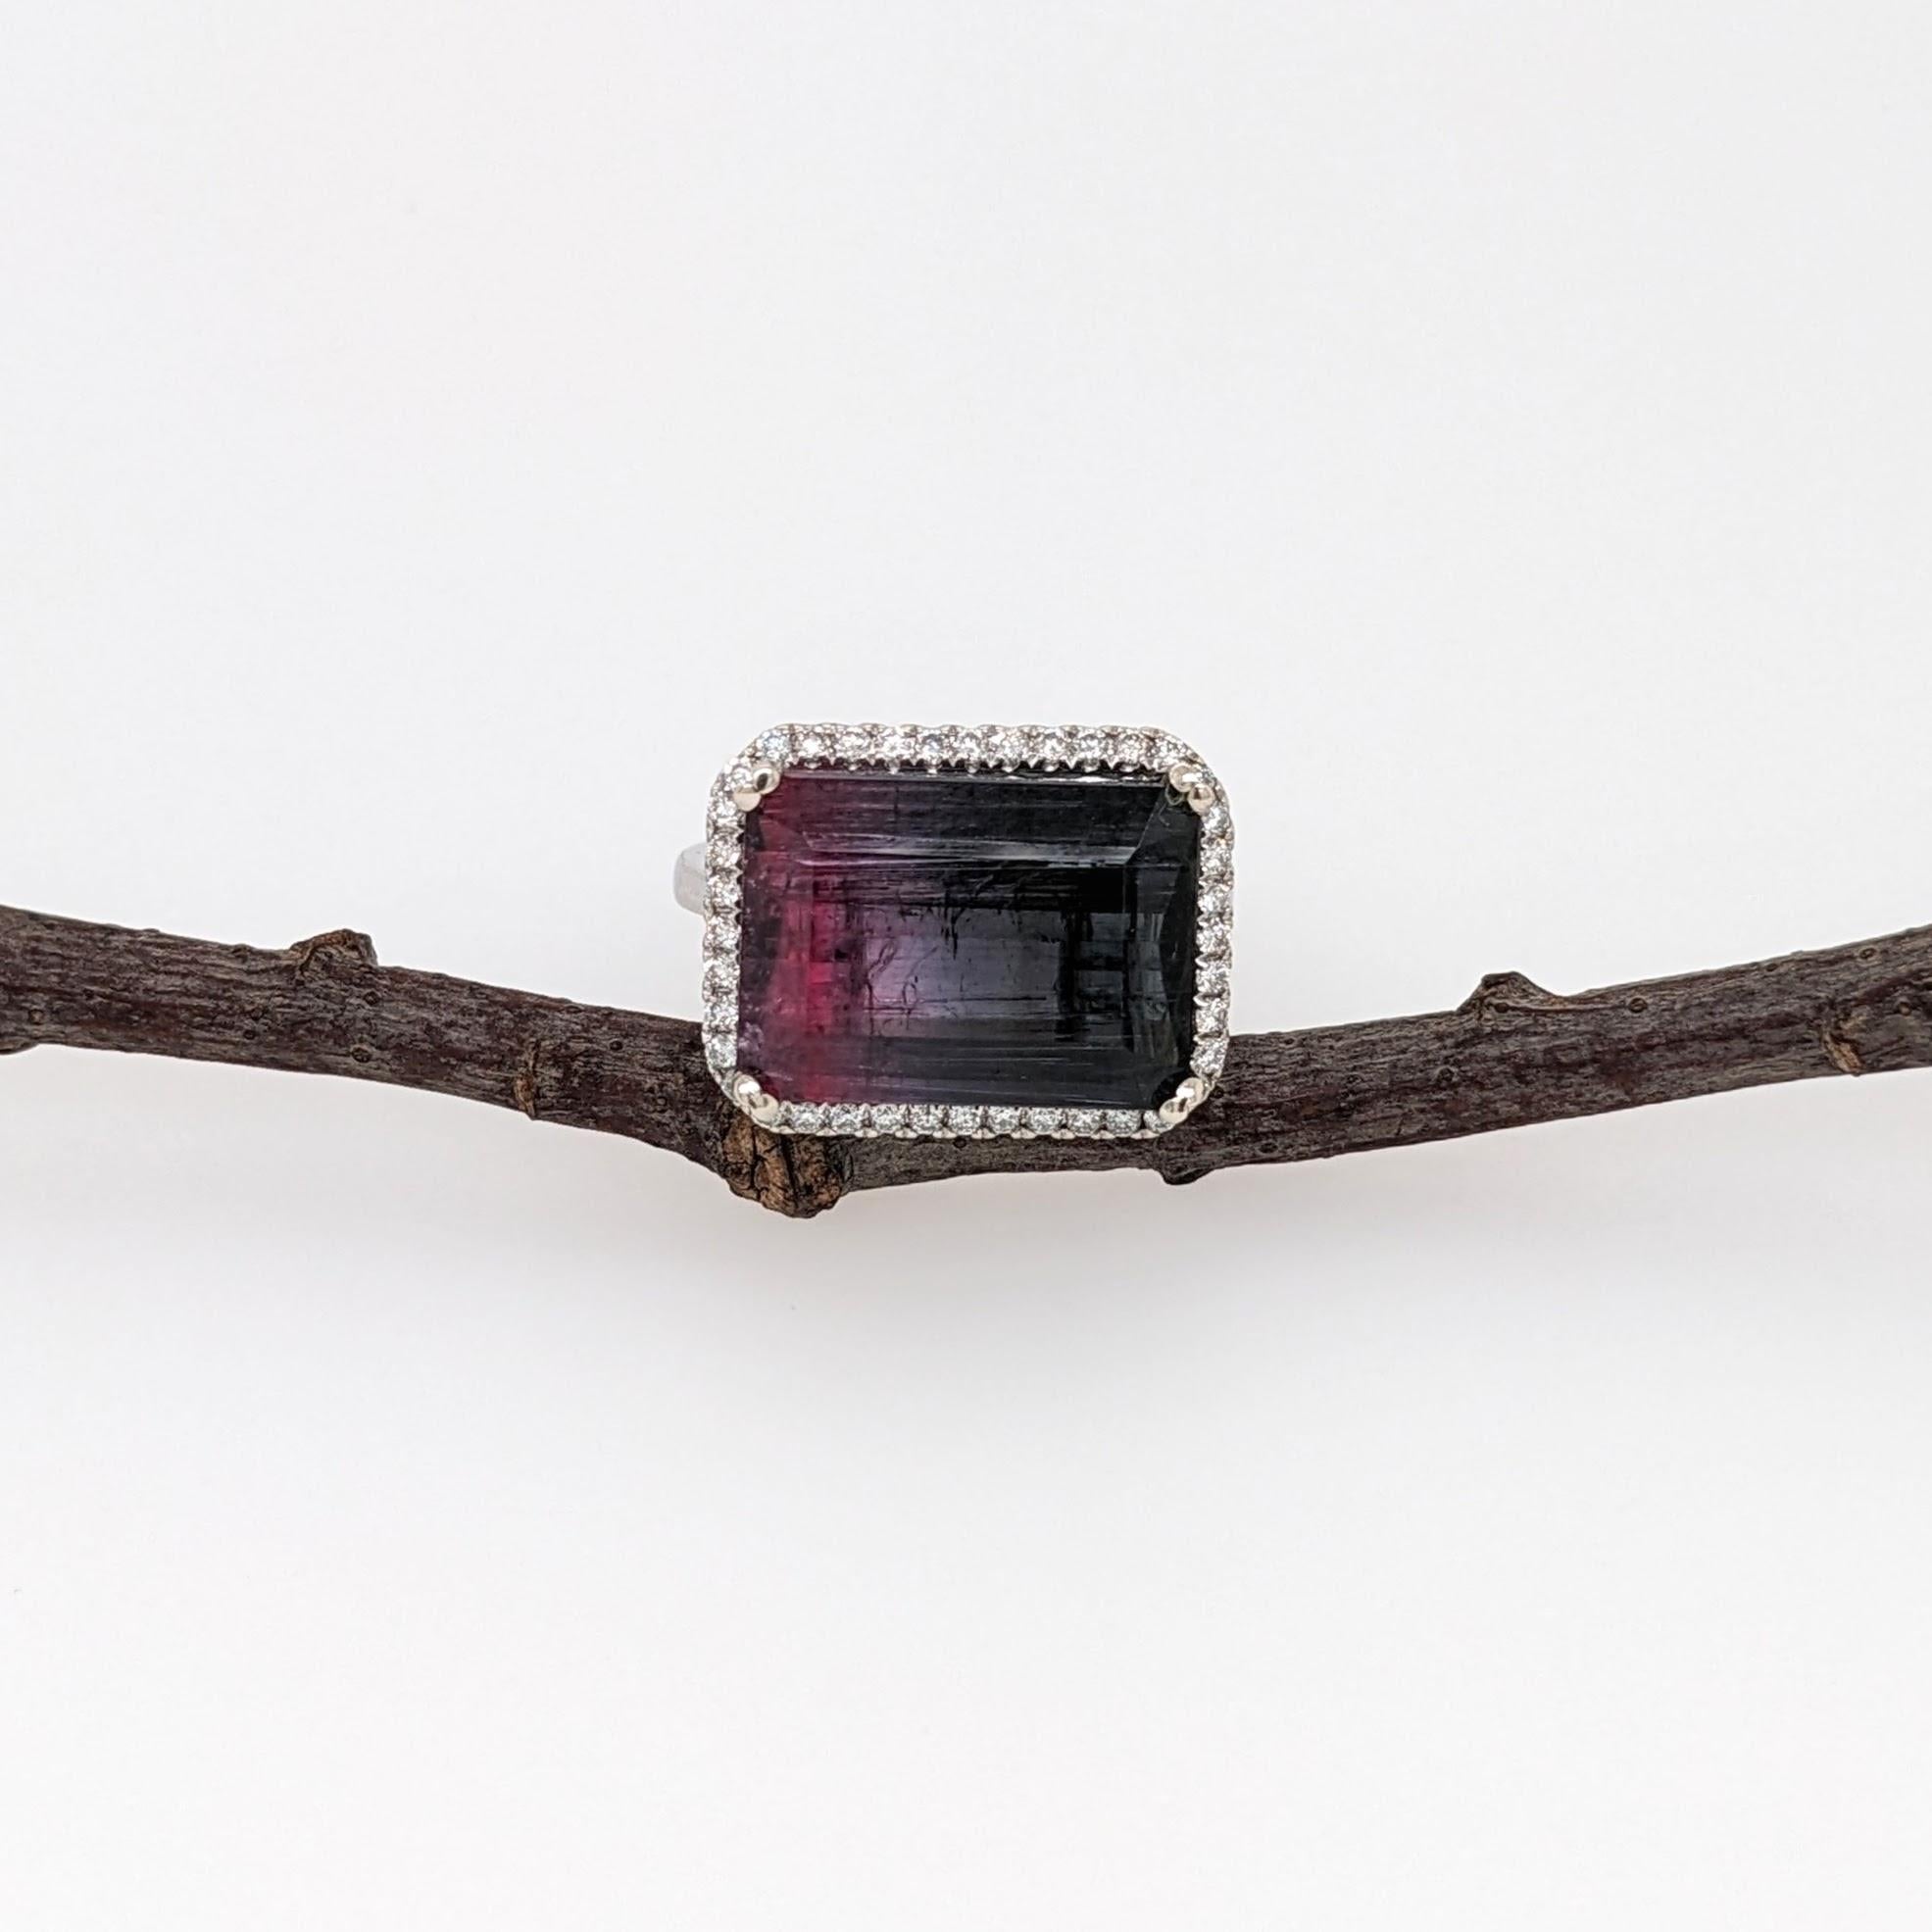 Gorgeous bi color tourmaline with rich pink/purple and black colors highlighted by a halo of sparkling diamonds. This ring make a great statement piece!

Specifications:

Item Type: Ring
Center Stone: Tourmaline
Treatment: None
Weight: 9.19ct
Head